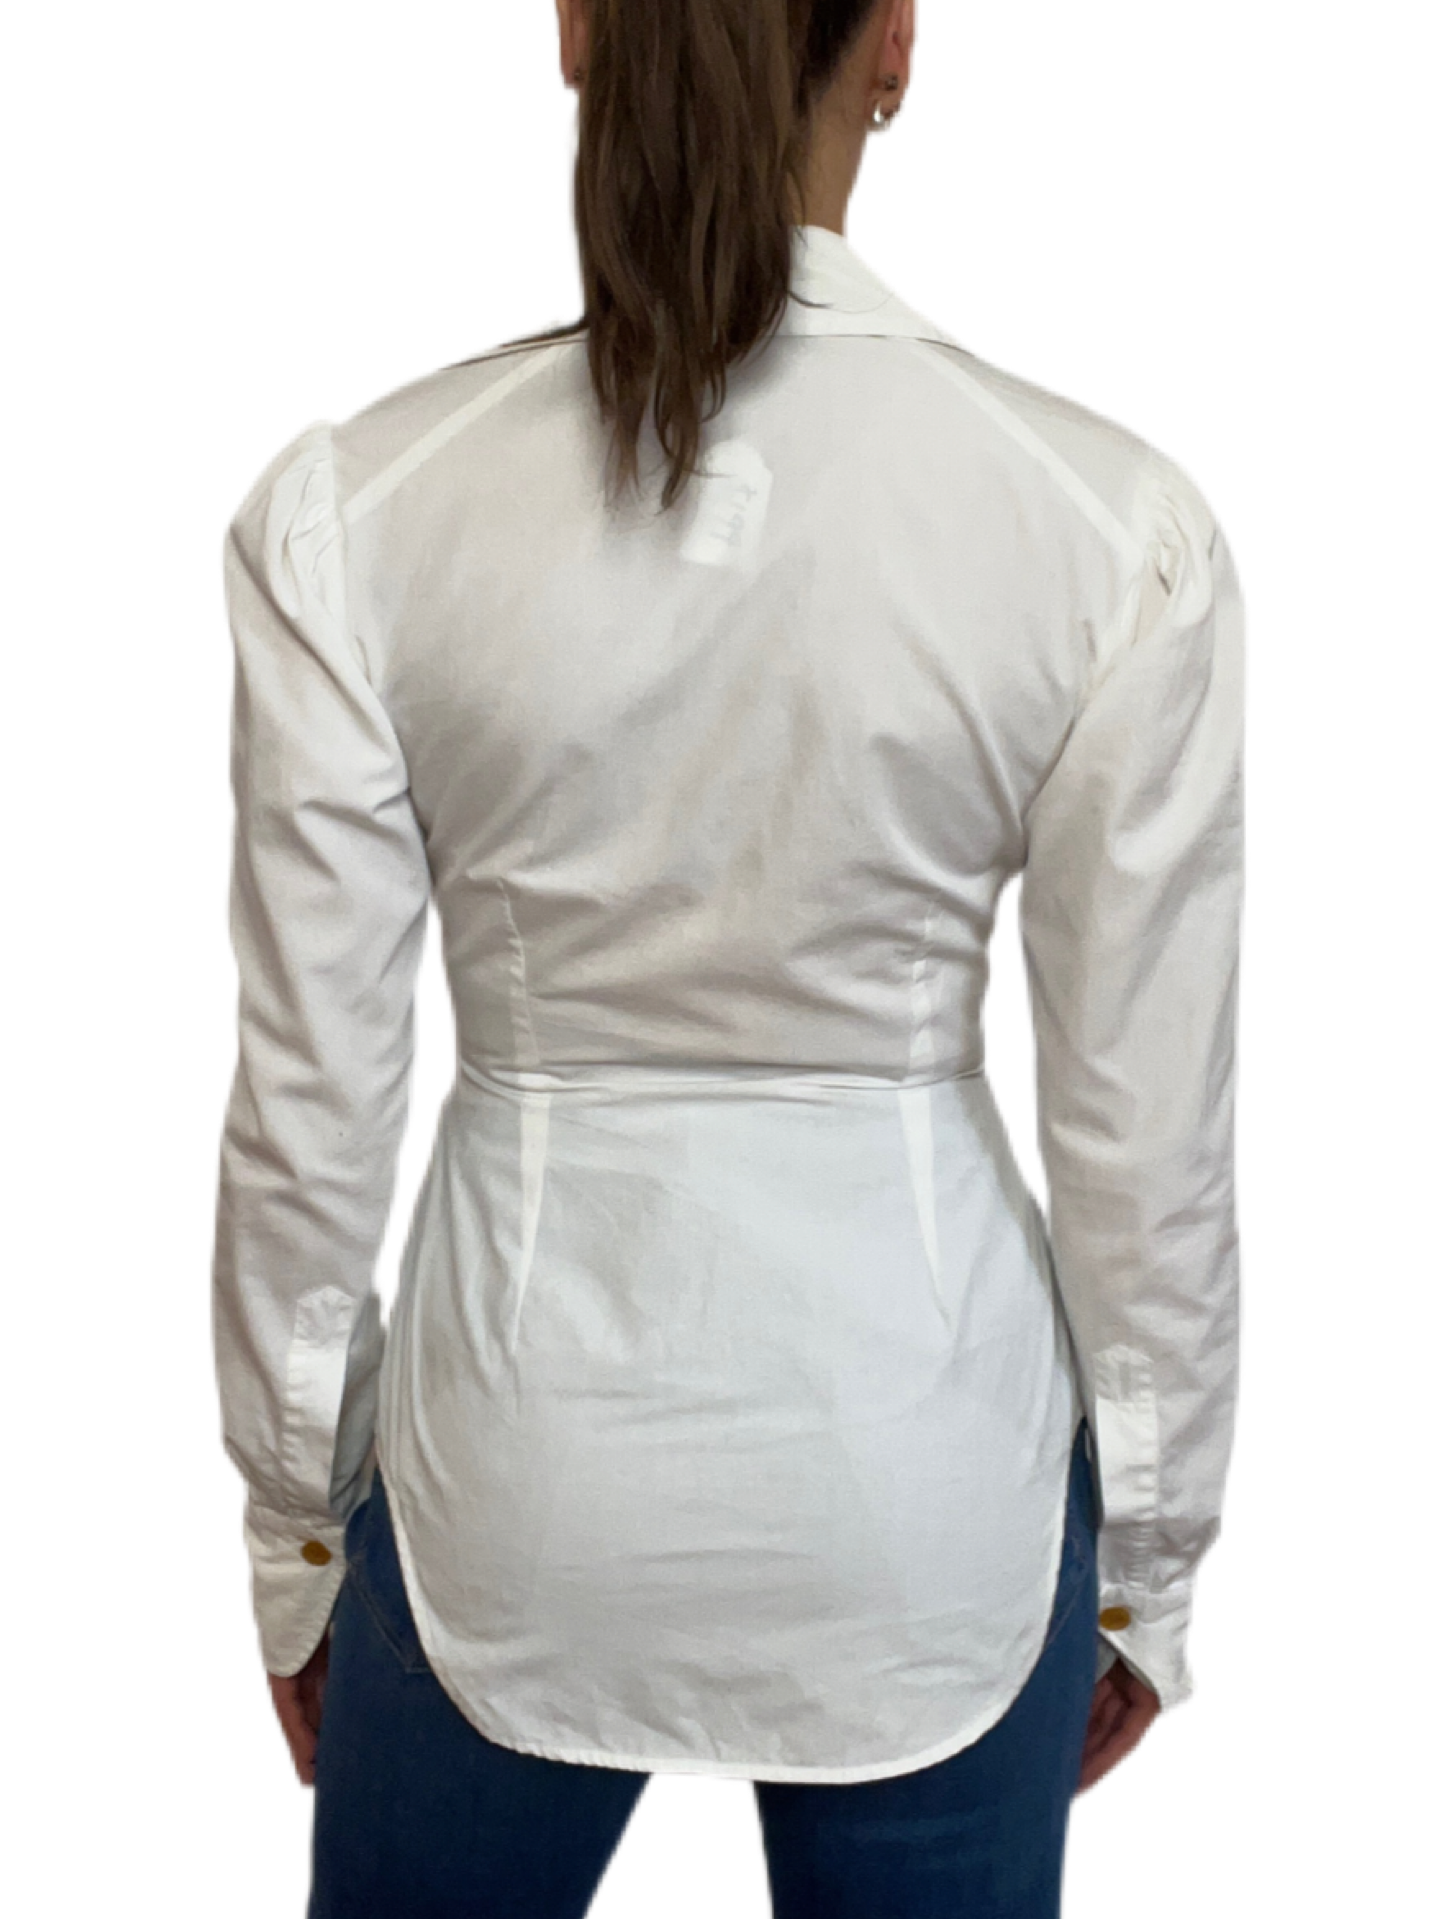 Vivienne Westwood White Fitted Shirt. Size: 36